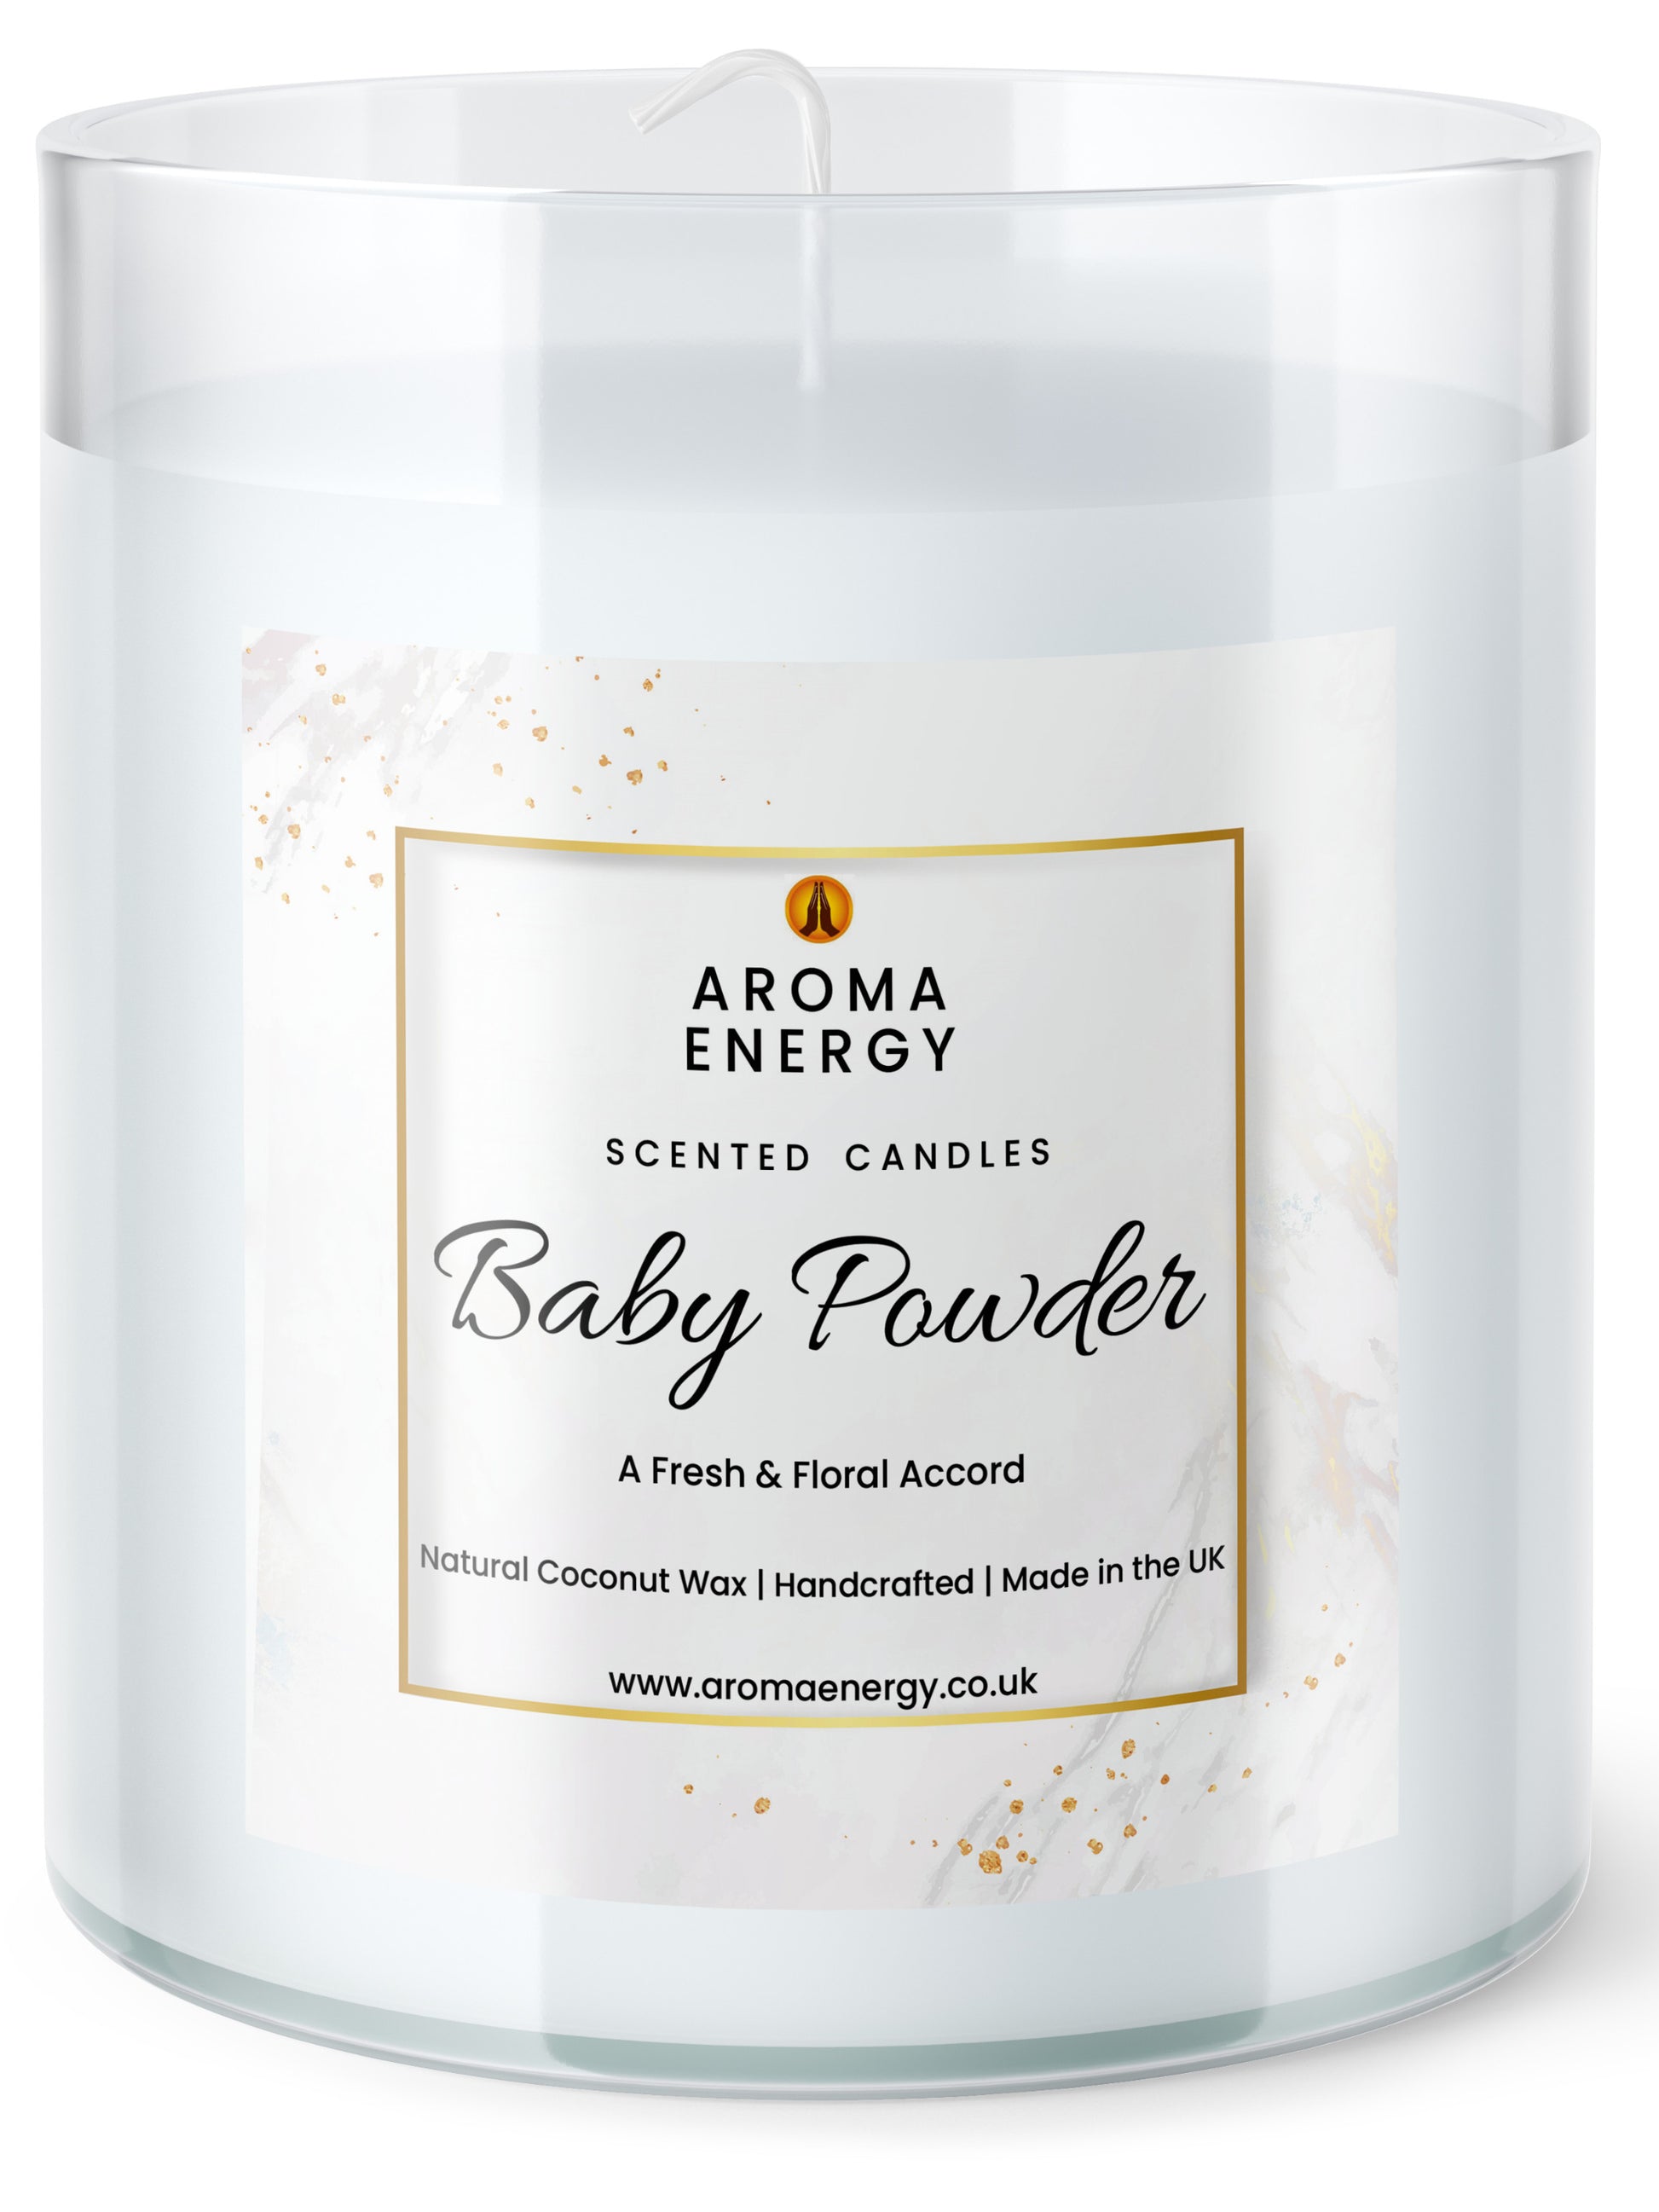 Baby Powder Scented Candle | Best home fragrance | Coconut Wax - Aroma Energy